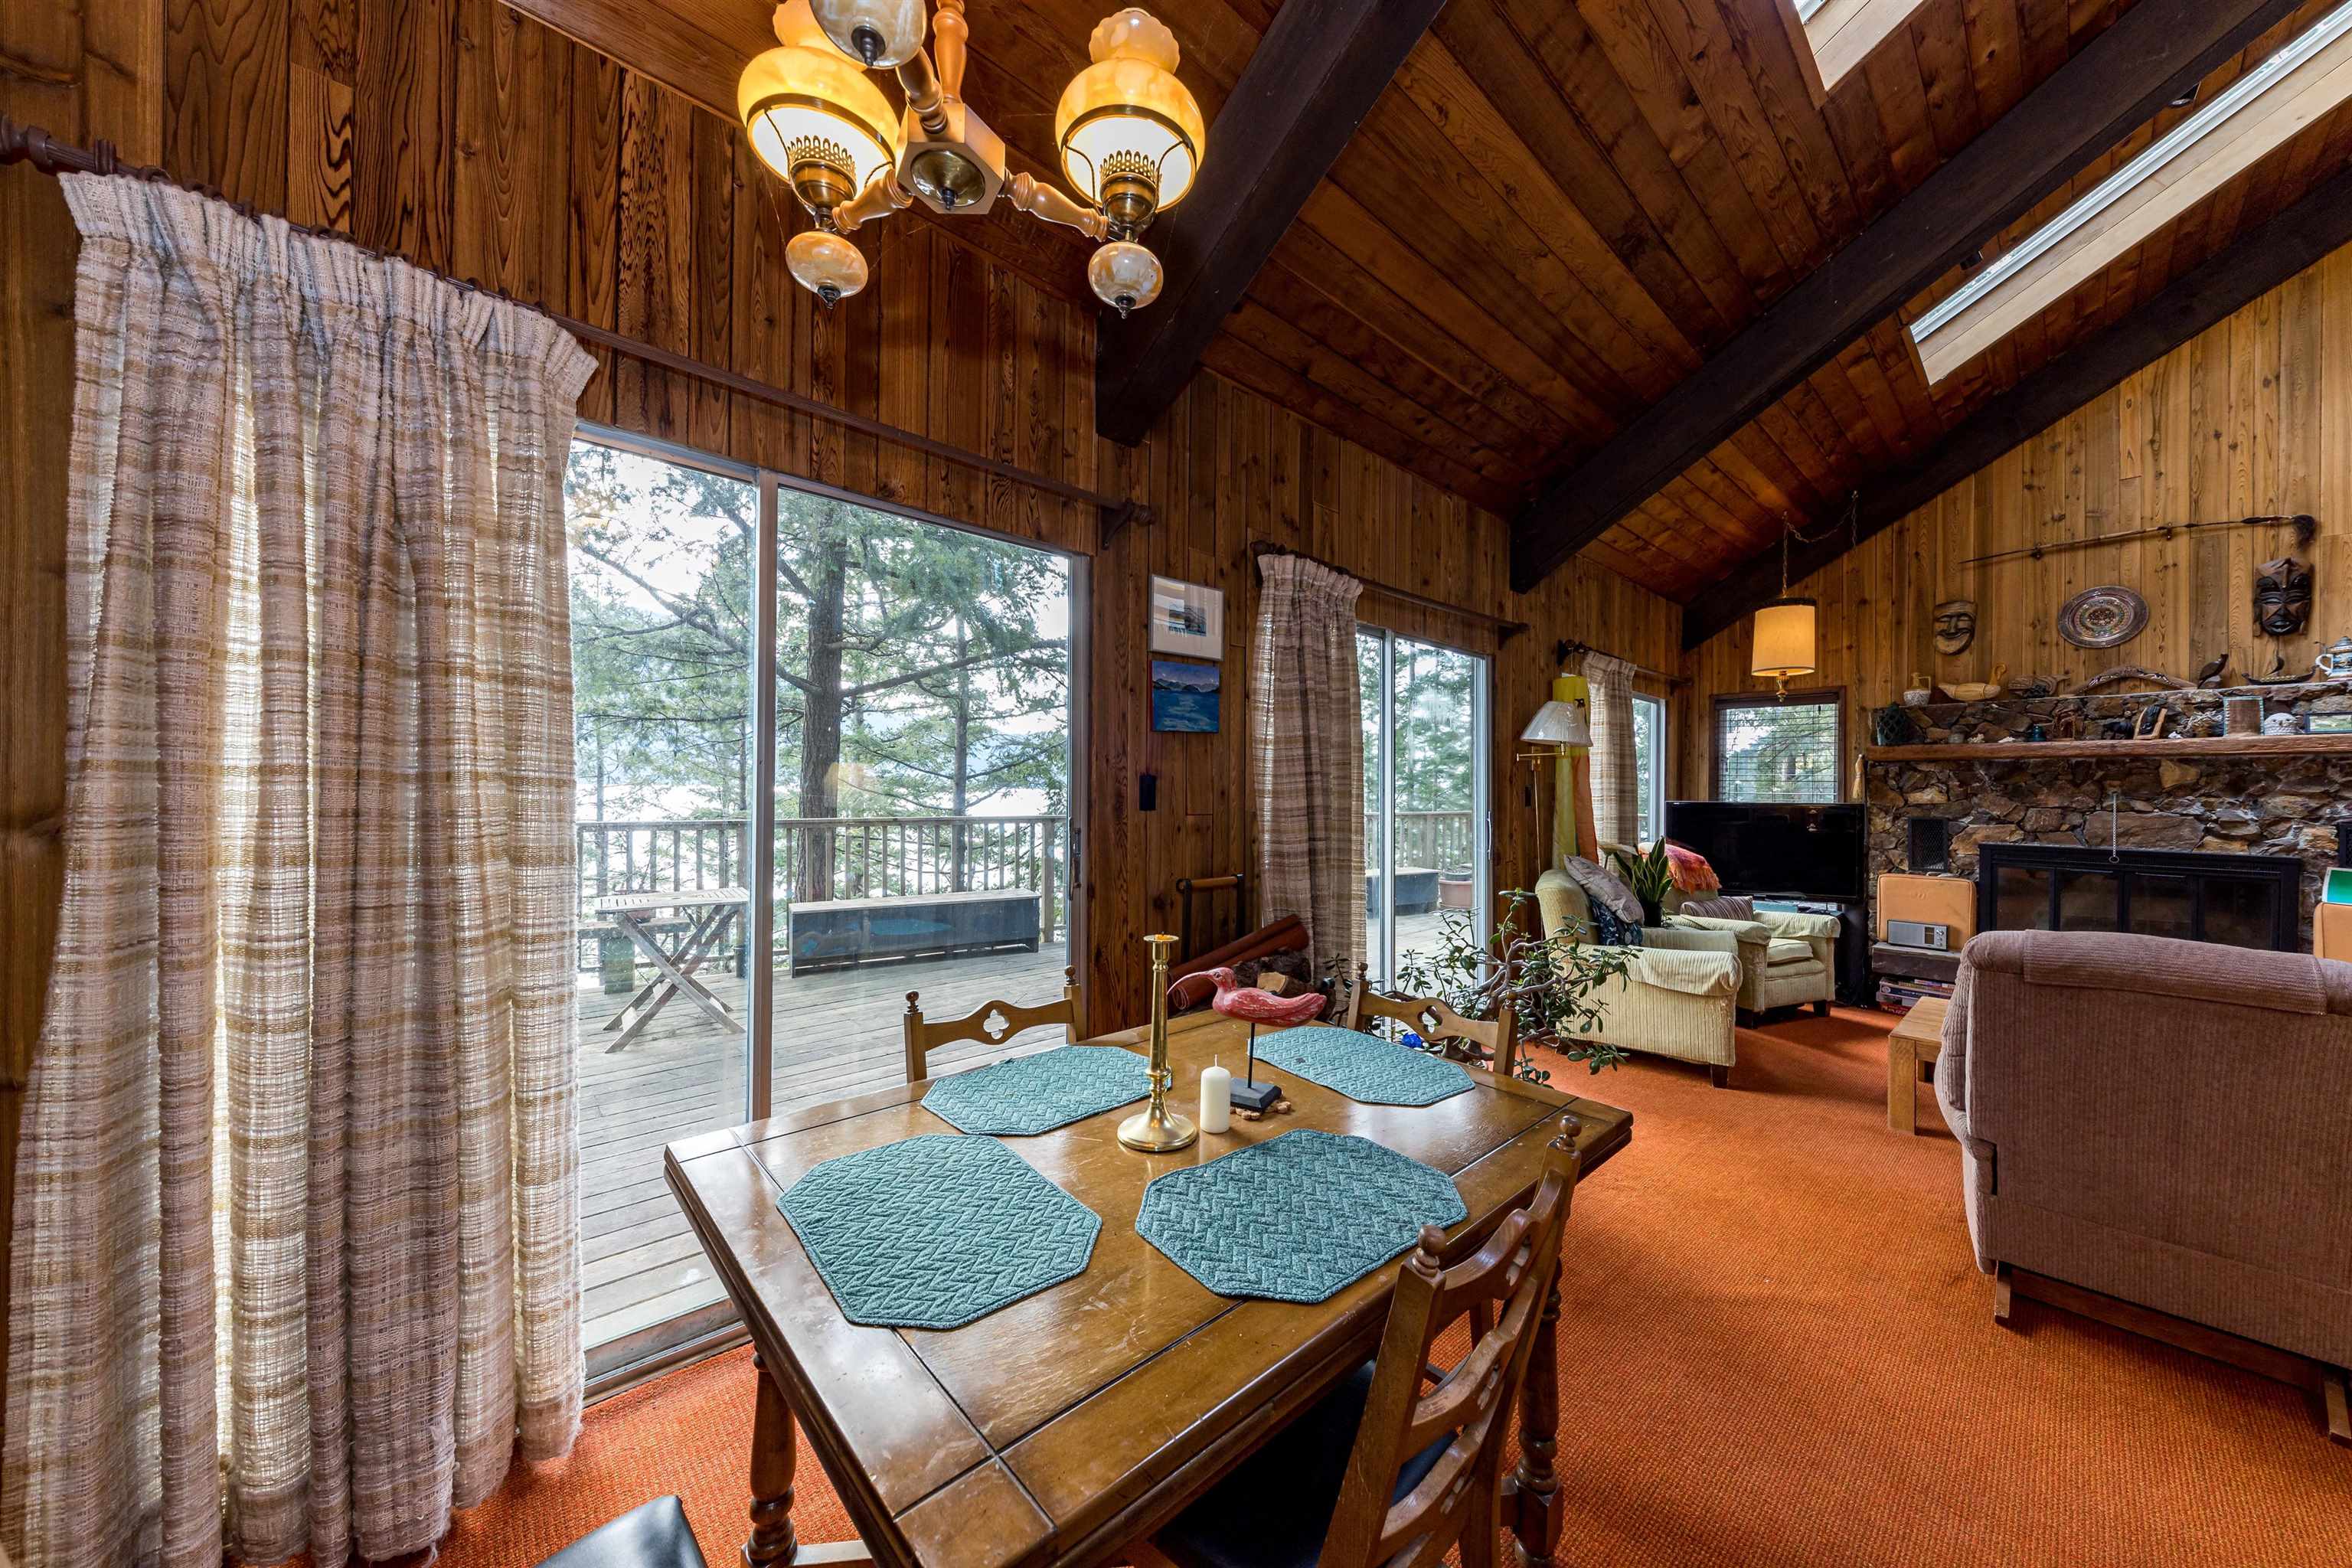 Listing image of 1591 EAGLE CLIFF ROAD